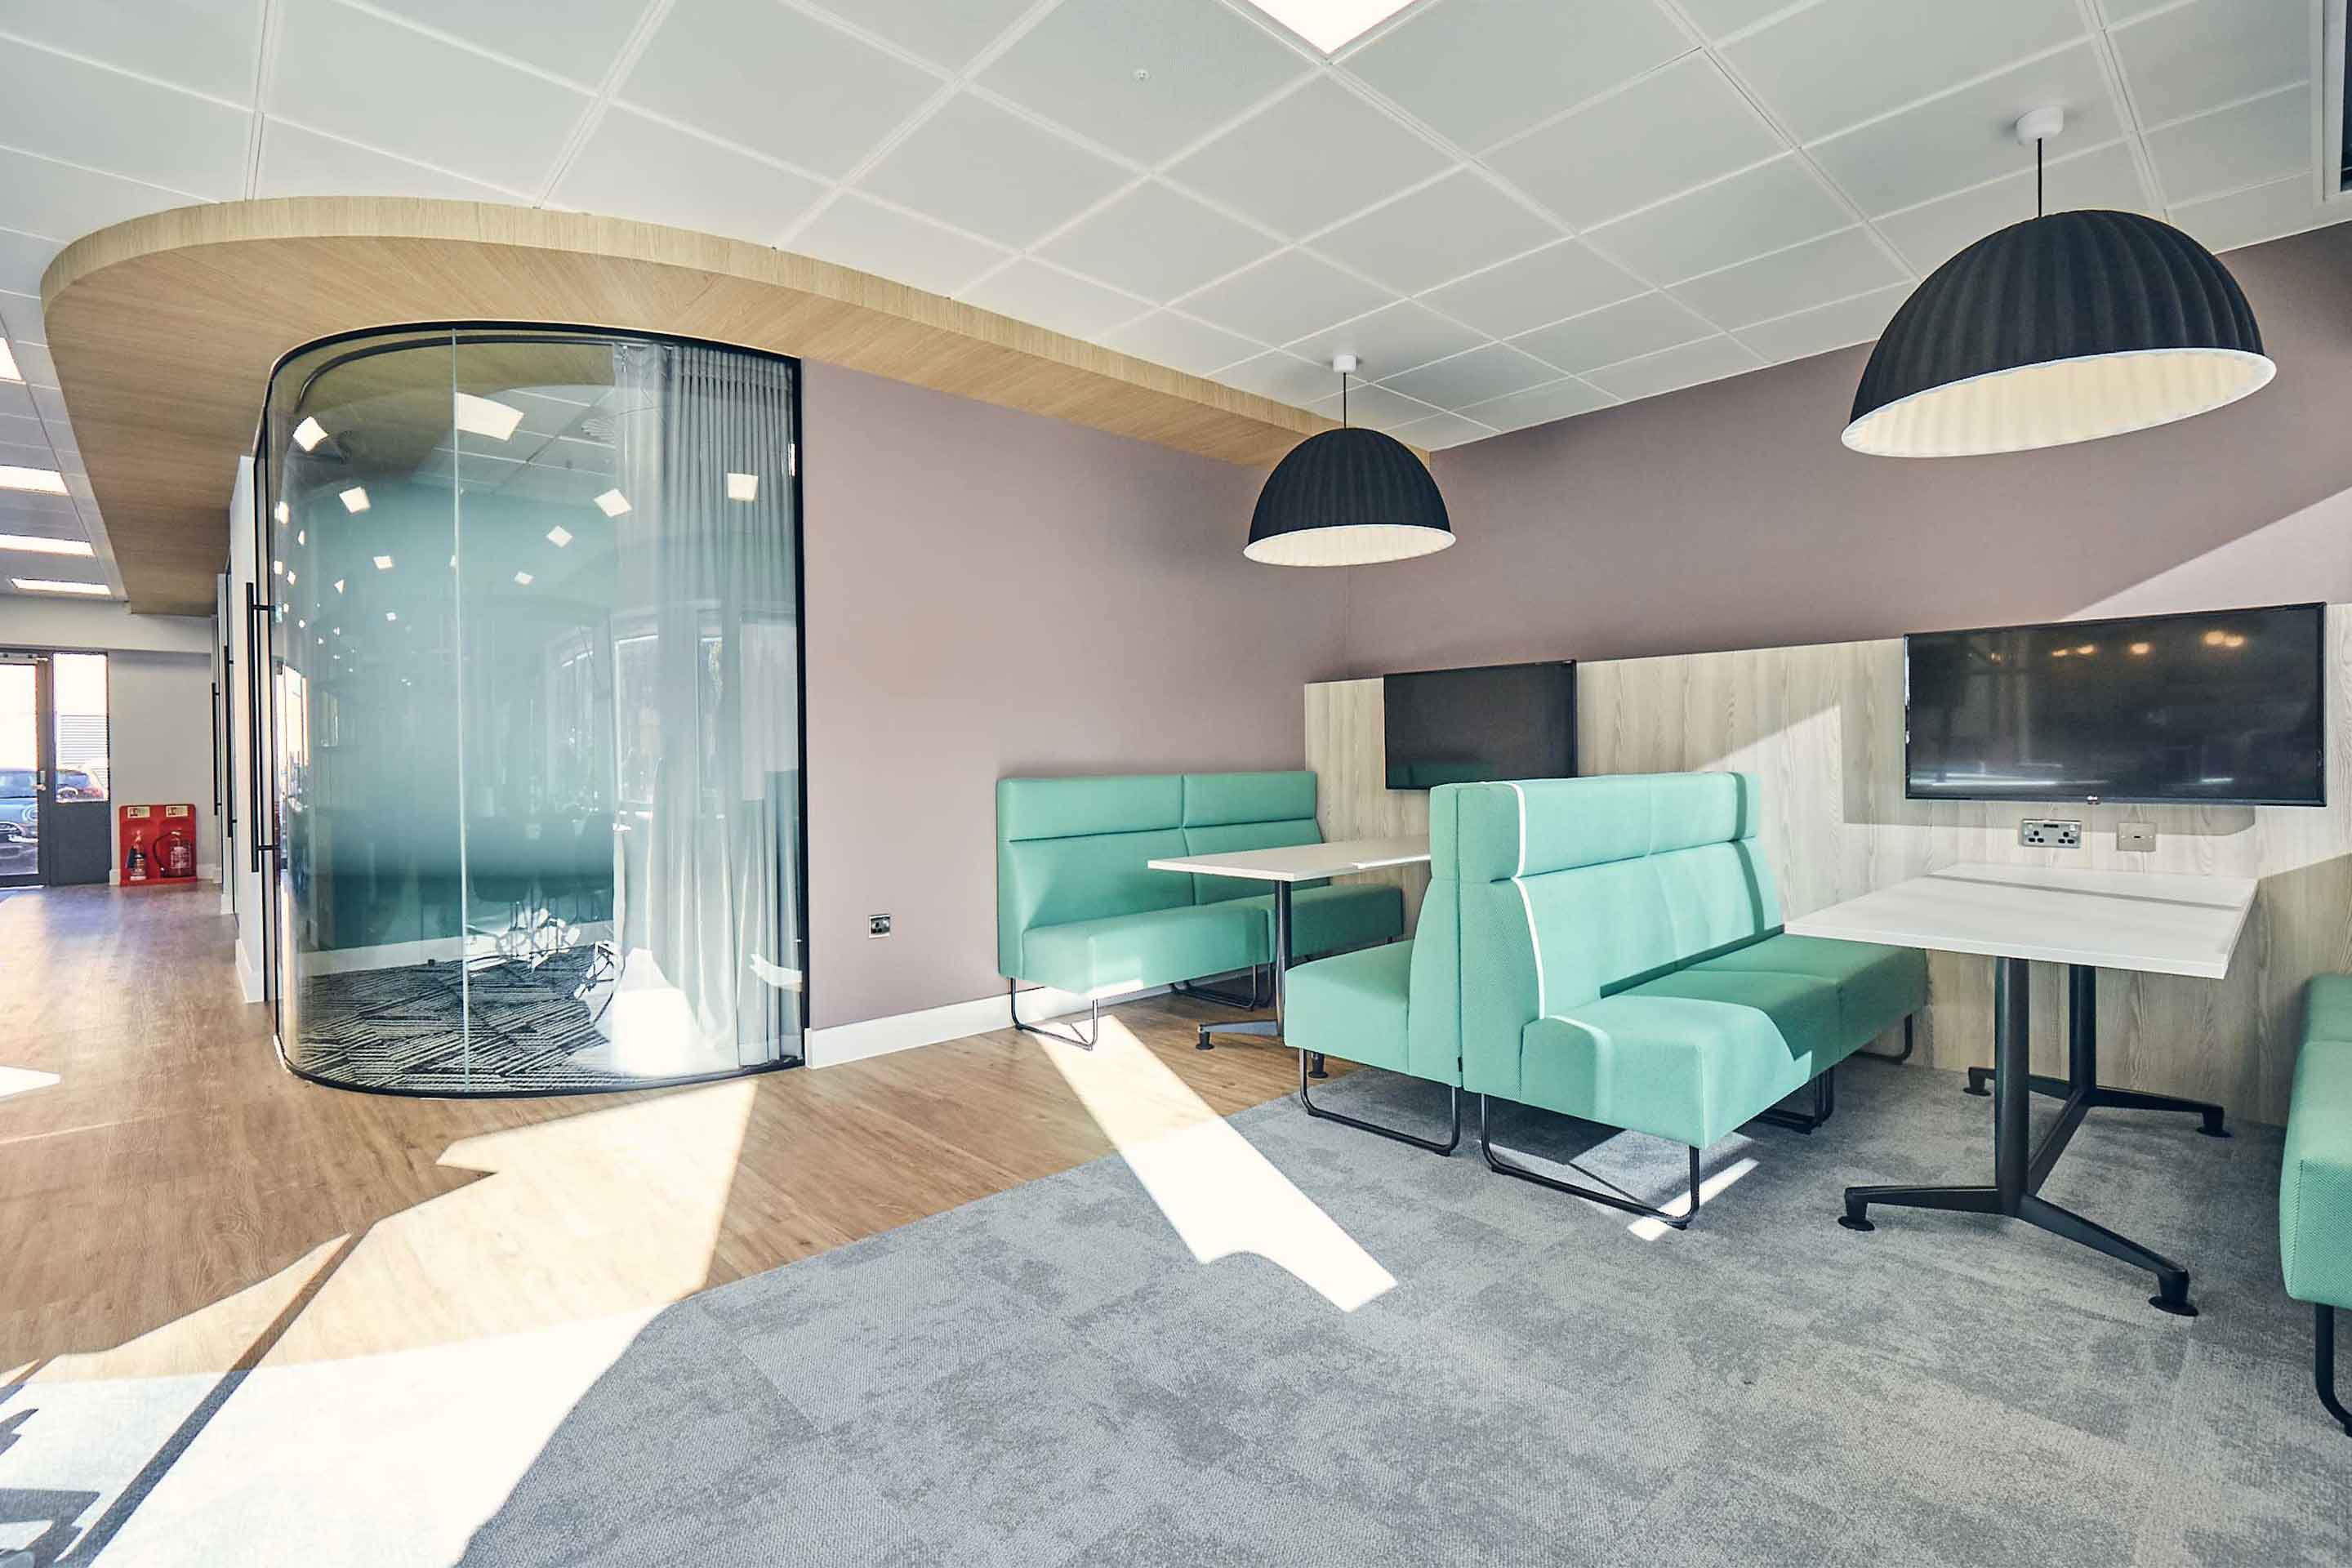 Turquoise booths with AV capabilities for quick meetings and socialising